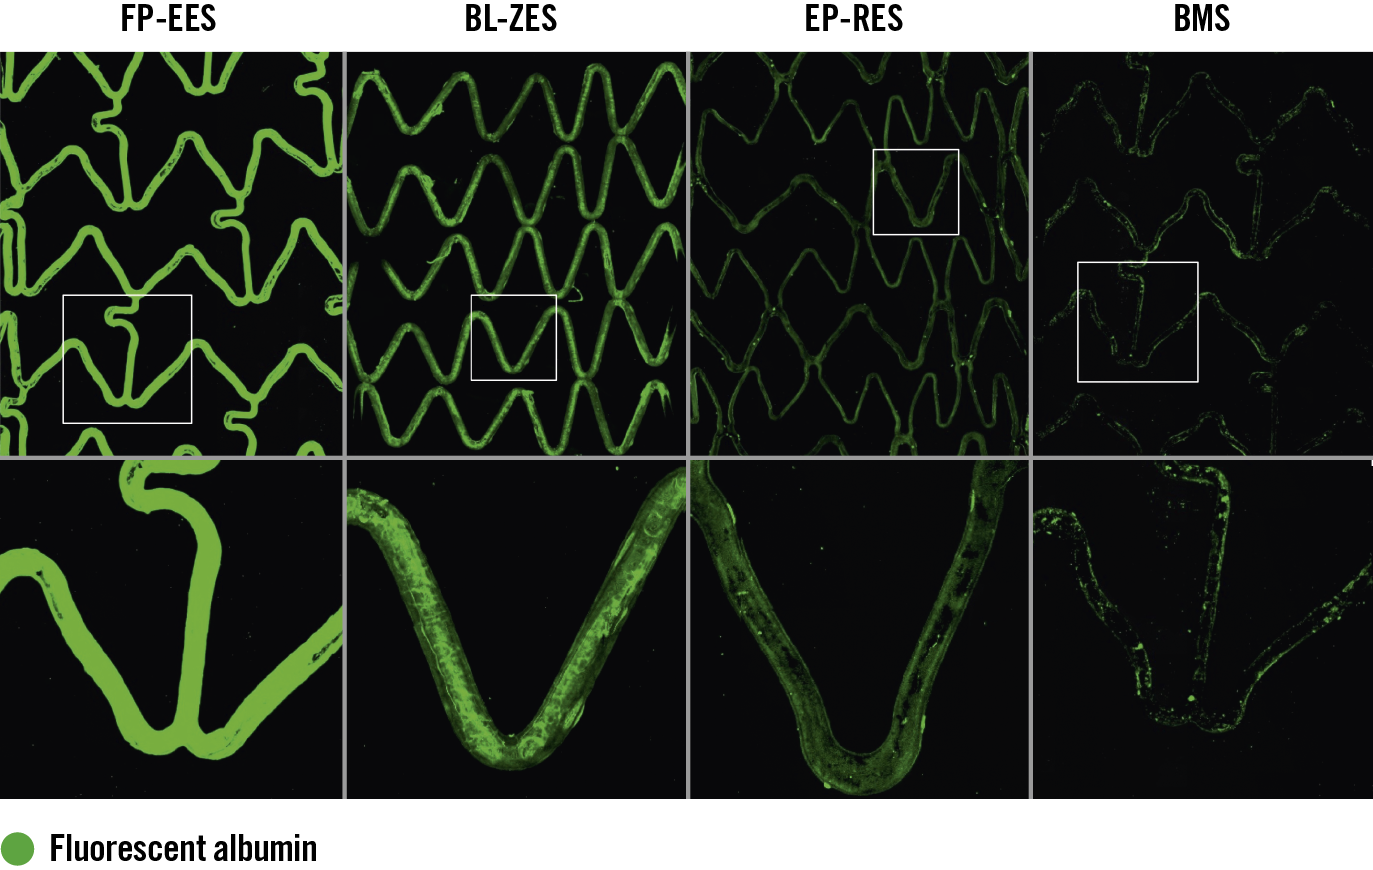 Figure 3. Representative confocal microscopic images using fluorescent human serum albumin in the flow loop model. The low (upper) and high (lower) power images show the stent surface fully covered by an obvious strong signal of fluorescent albumin in FP-EES. On the other hand, although BL-ZES and EP-RES also showed near complete coverage by albumin, the albumin signals (green) on the surface in BL-ZES and EP-RES were less intense relative to FP-EES. Minimal albumin signal was observed in BMS.